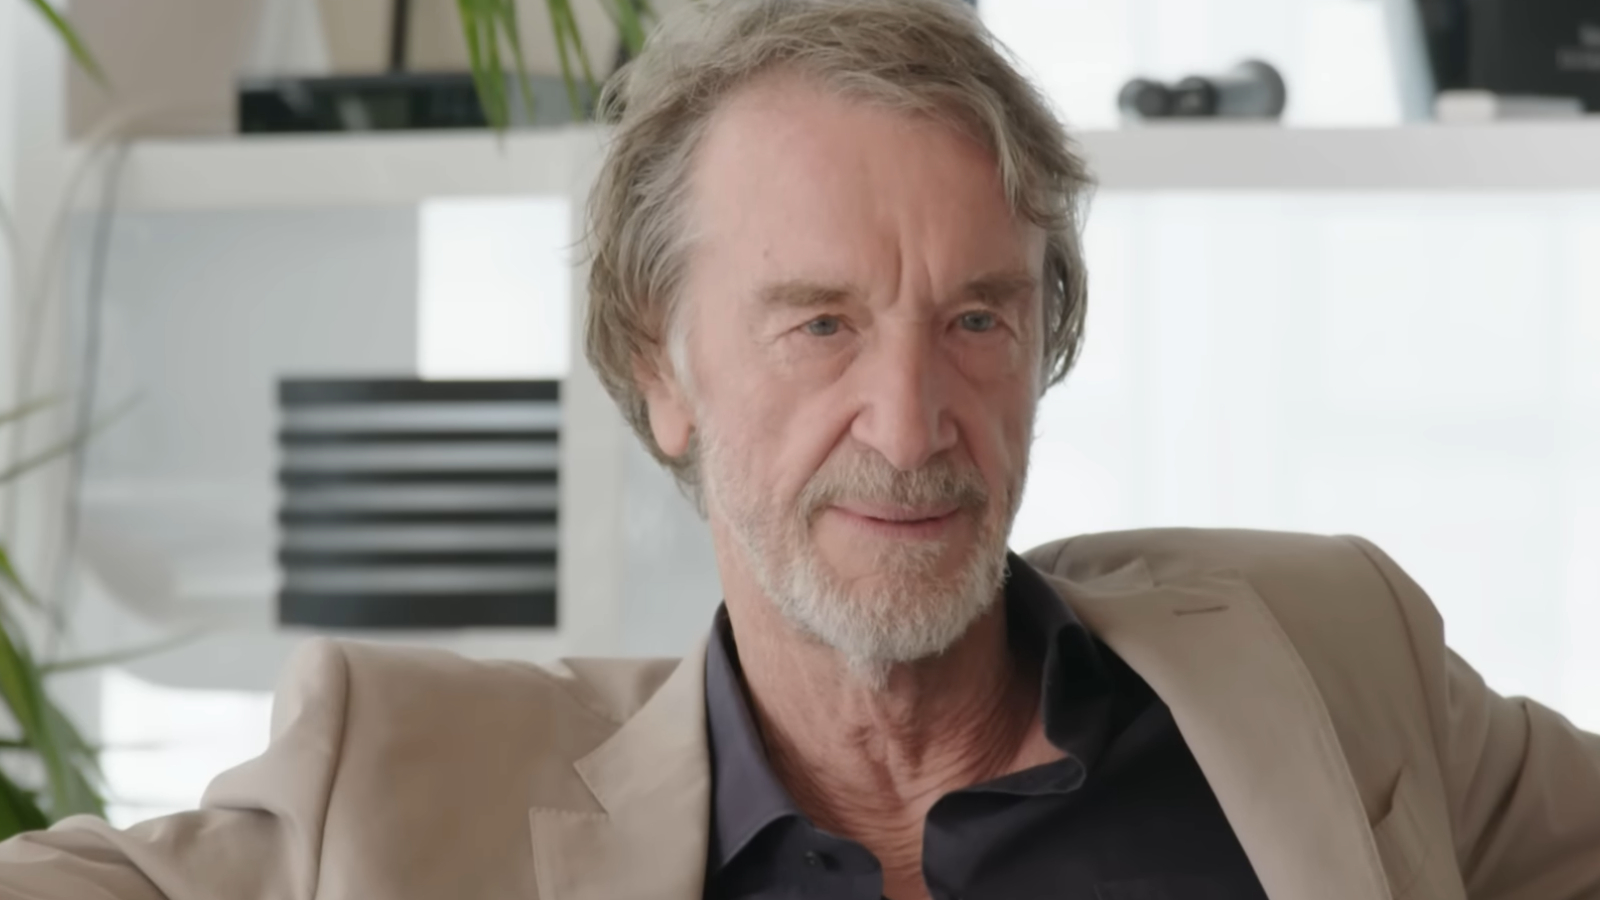 Sir Jim Ratcliffe lists four objectives at Manchester United - Dexerto